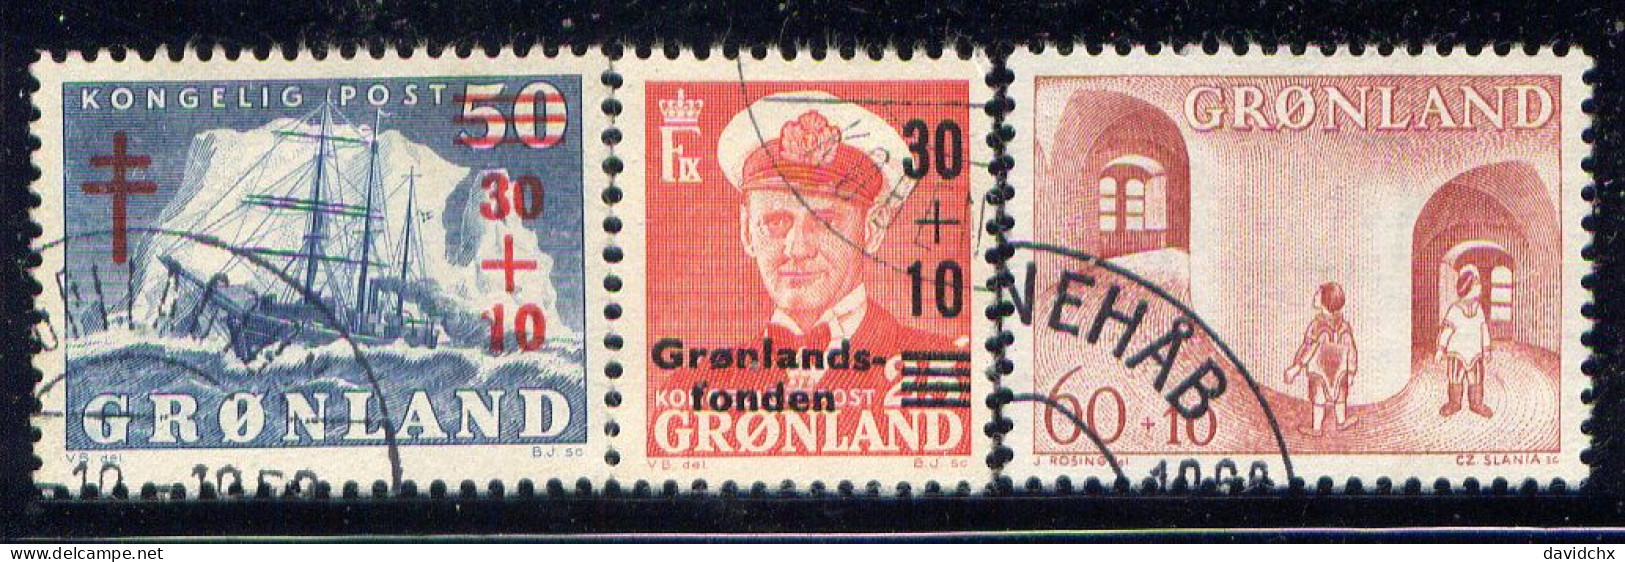 GREENLAND, NO.'S B1-B3 - Used Stamps